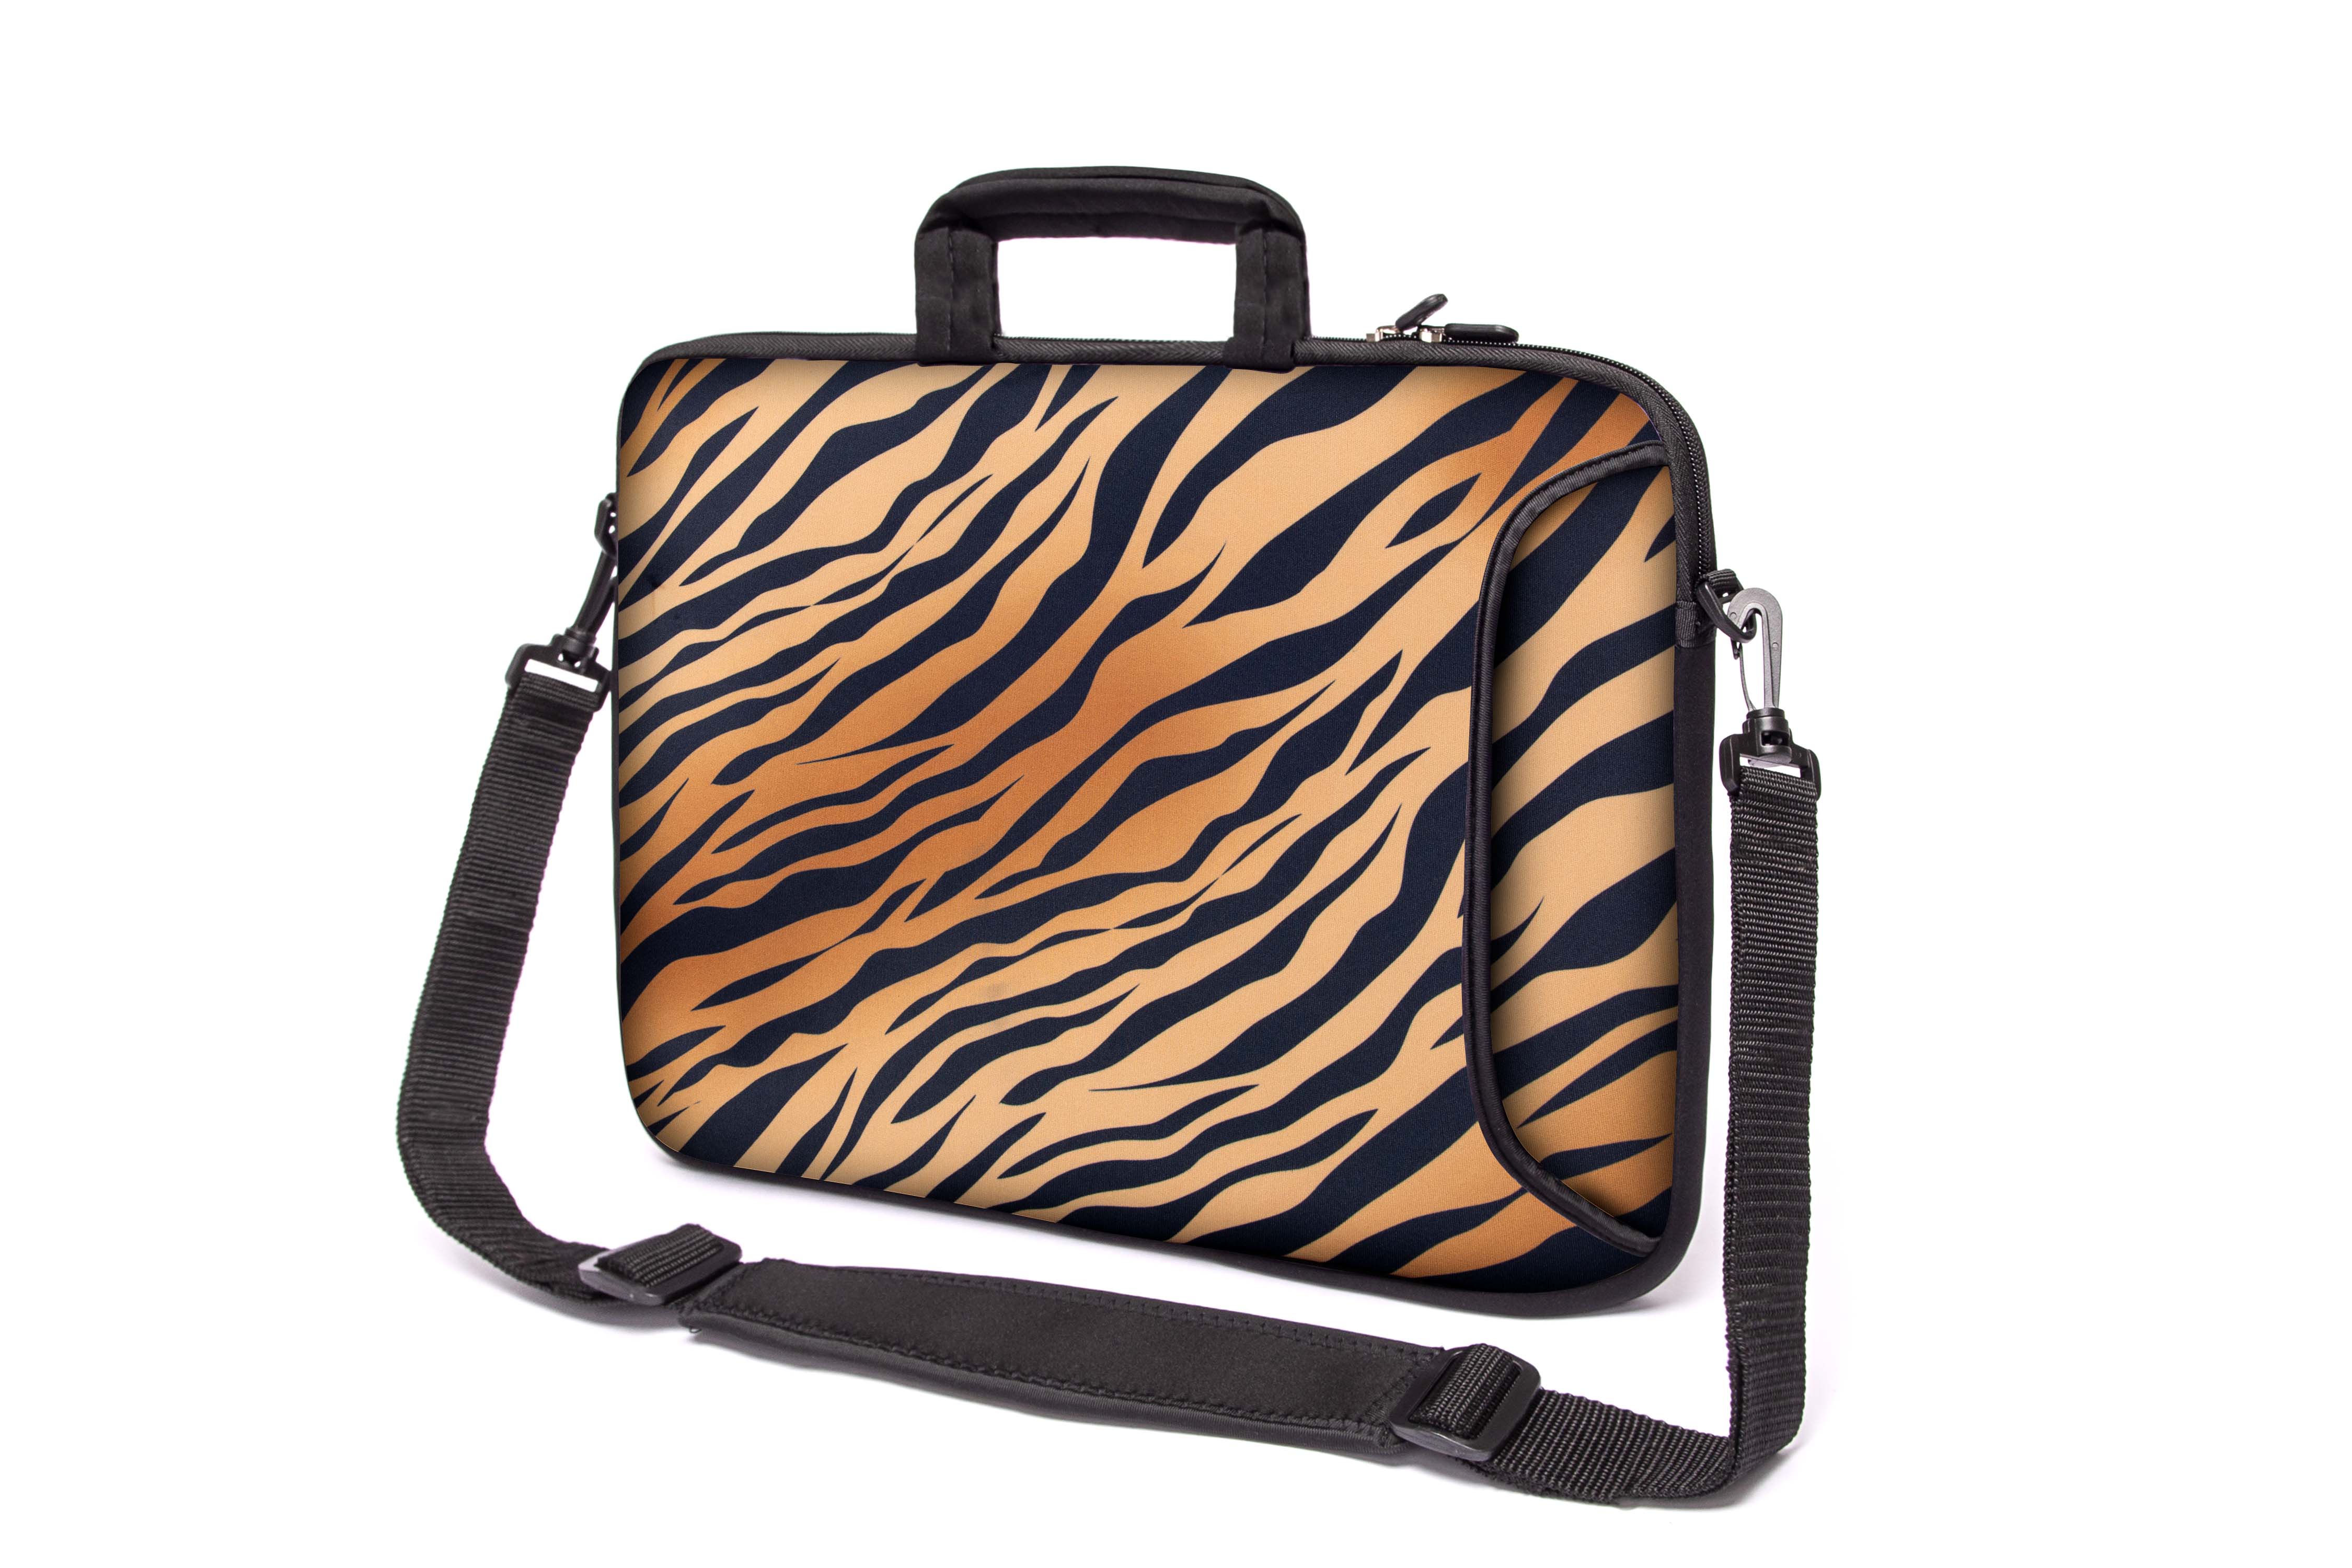 17"- 17.3" (inch) LAPTOP BAG/CASE WITH HANDLE & STRAP, NEOPRENE MADE FOR LAPTOPS/NOTEBOOKS, ZIPPED*PANTHER STRIPES*